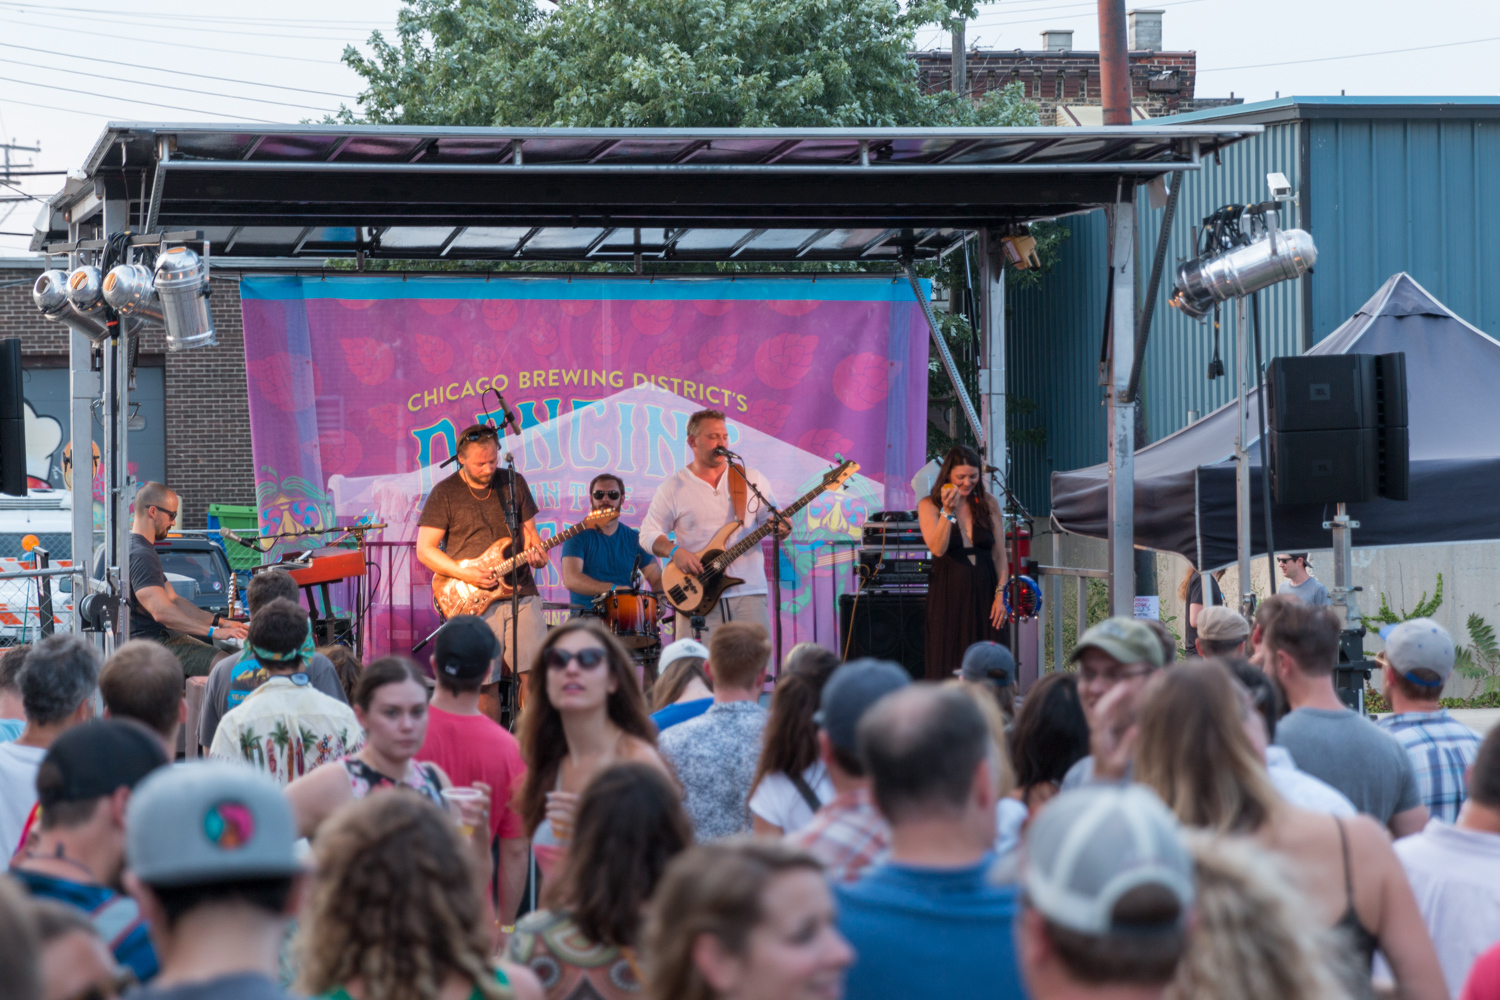 West Town Brewing District's Dancing in the Streets Things to do in